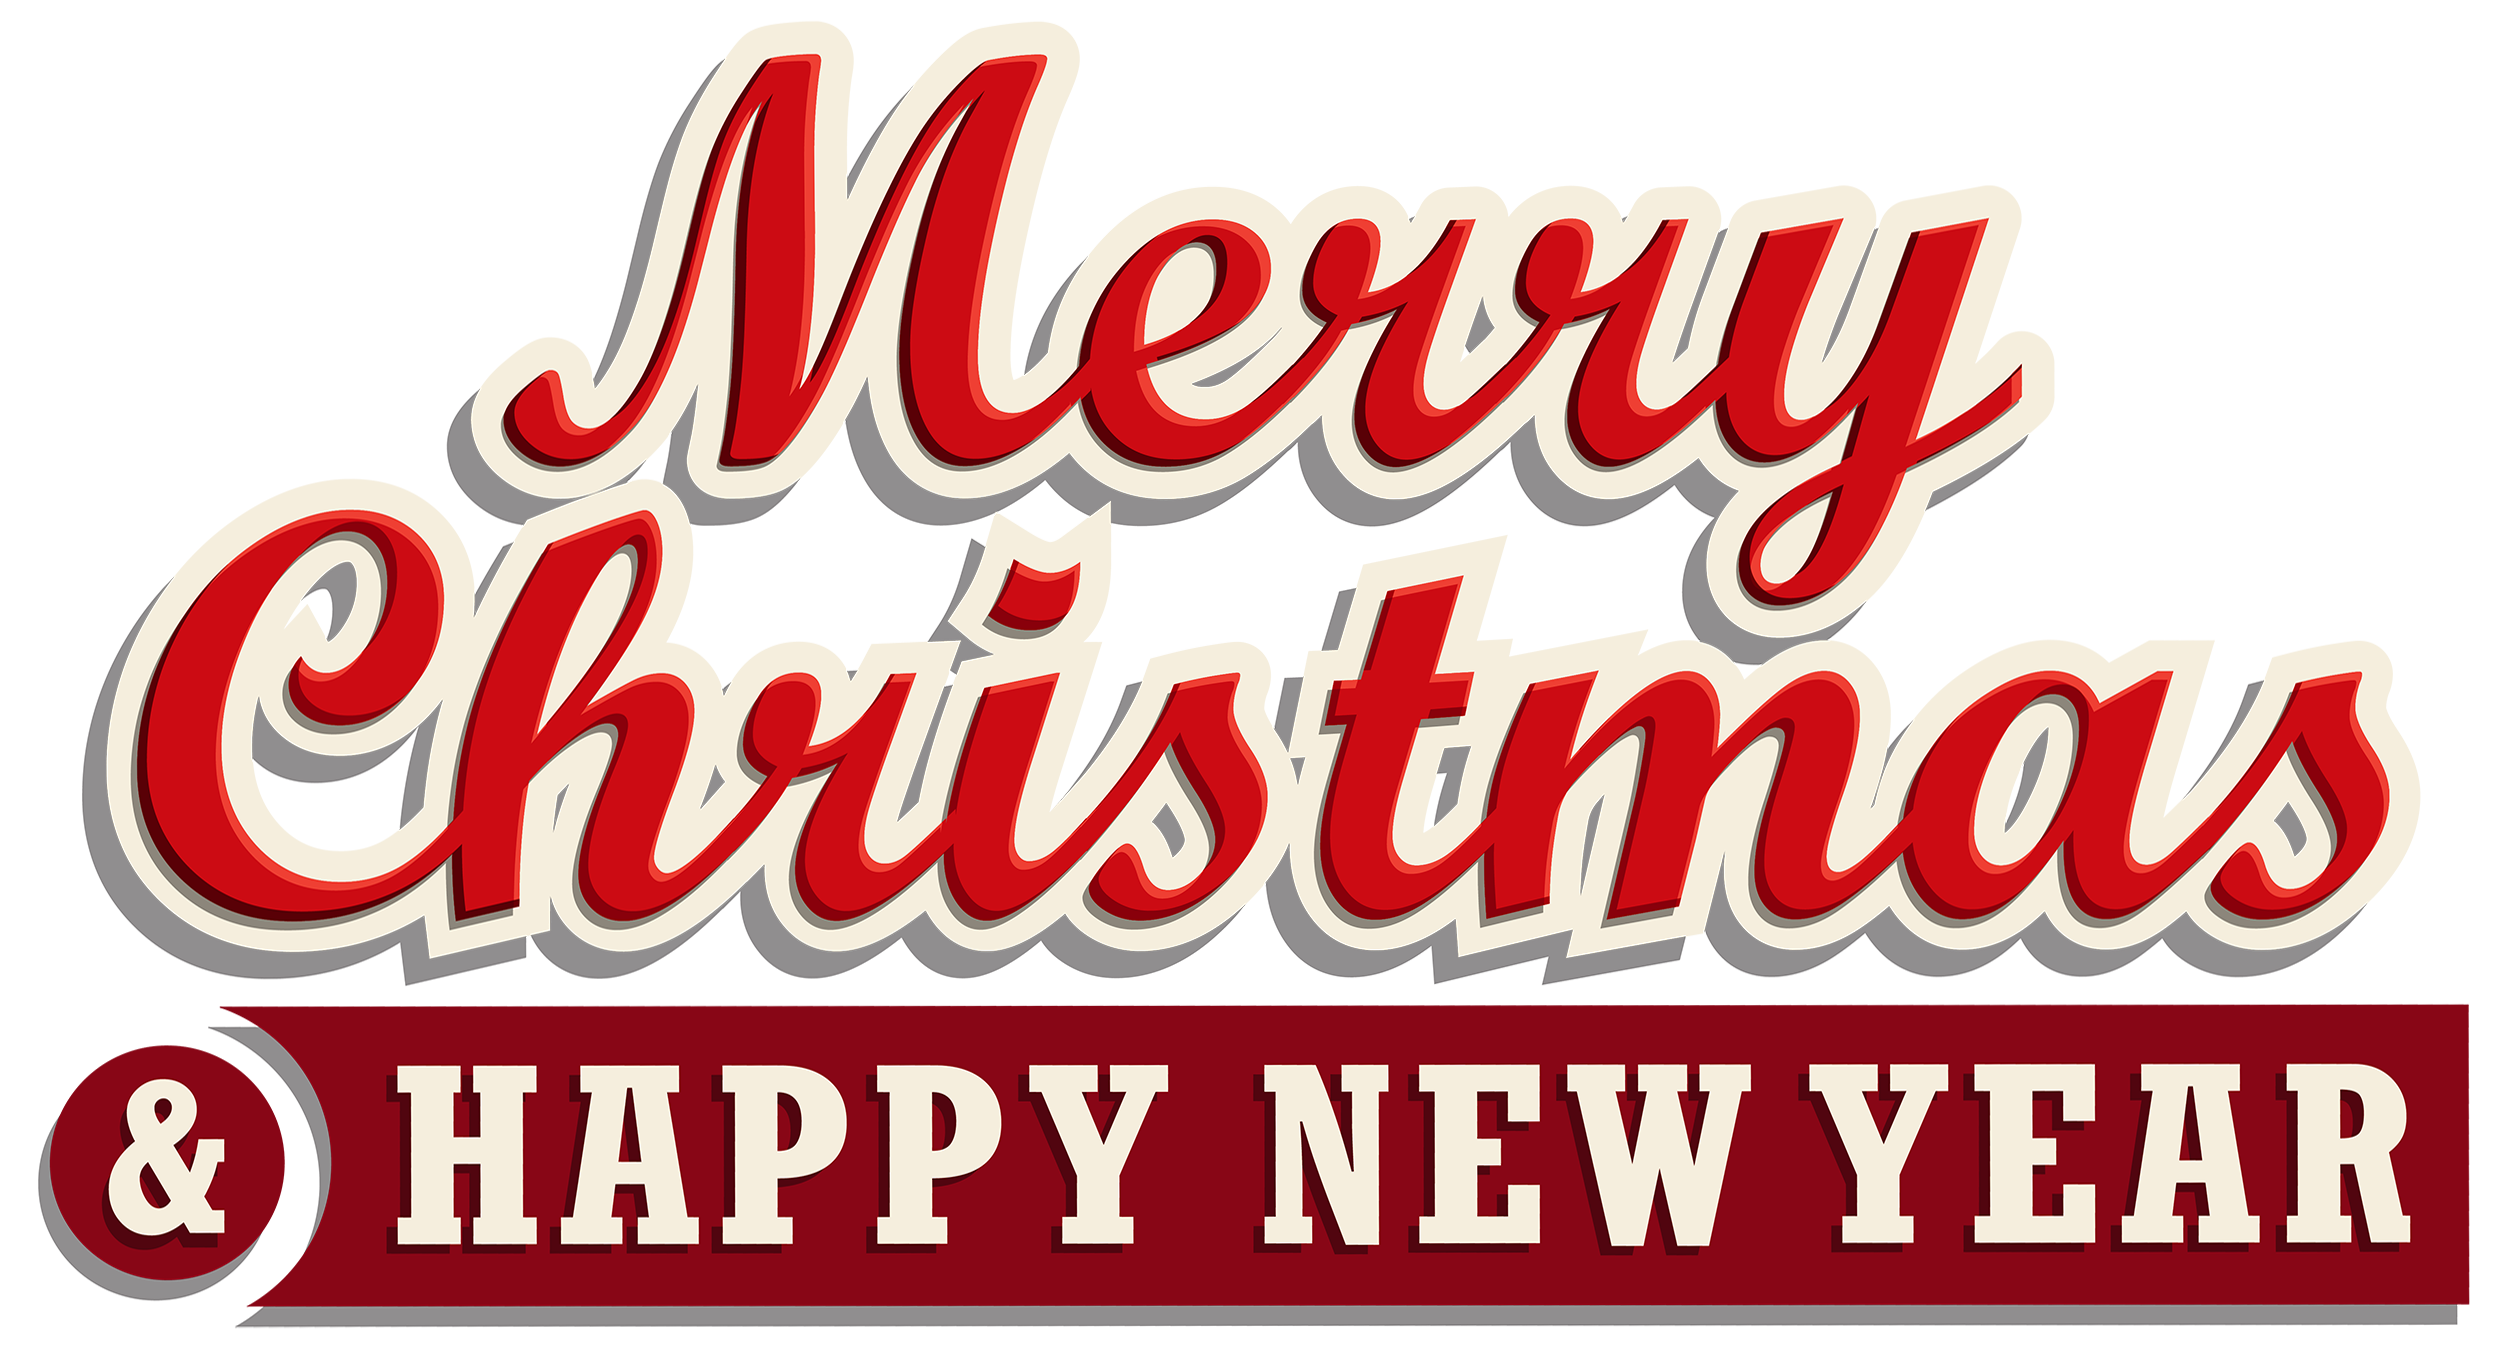 merry christmas and happy new year logo png